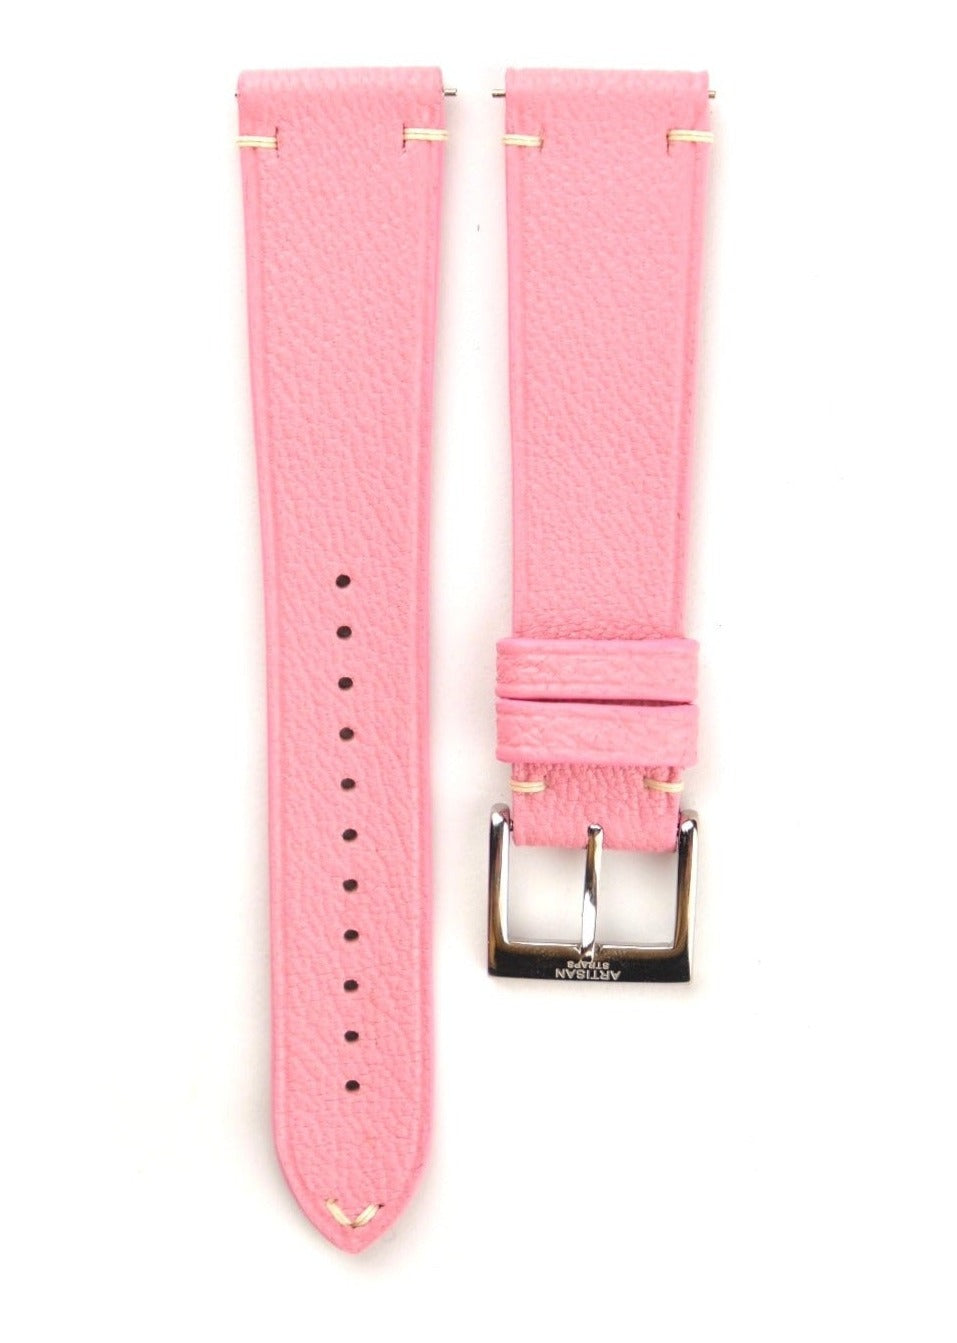 Chèvre (French Goat) Leather Strap in Pink - Artisan Straps